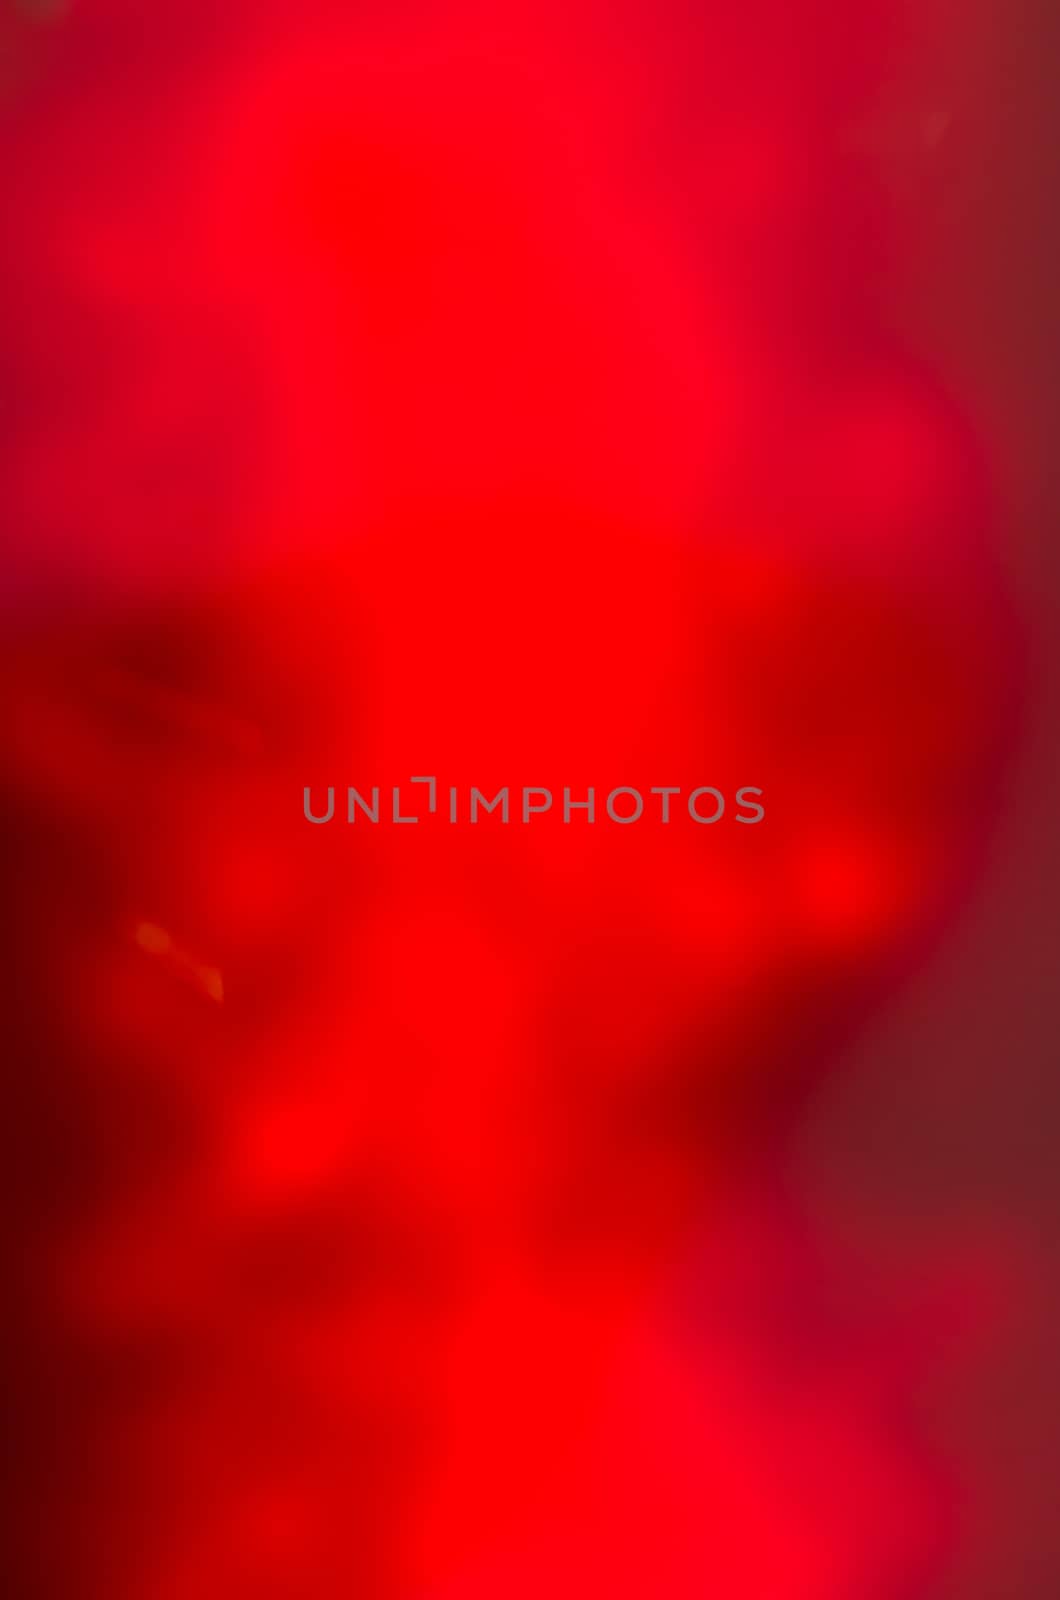 Abstract background blur red by aoo3771